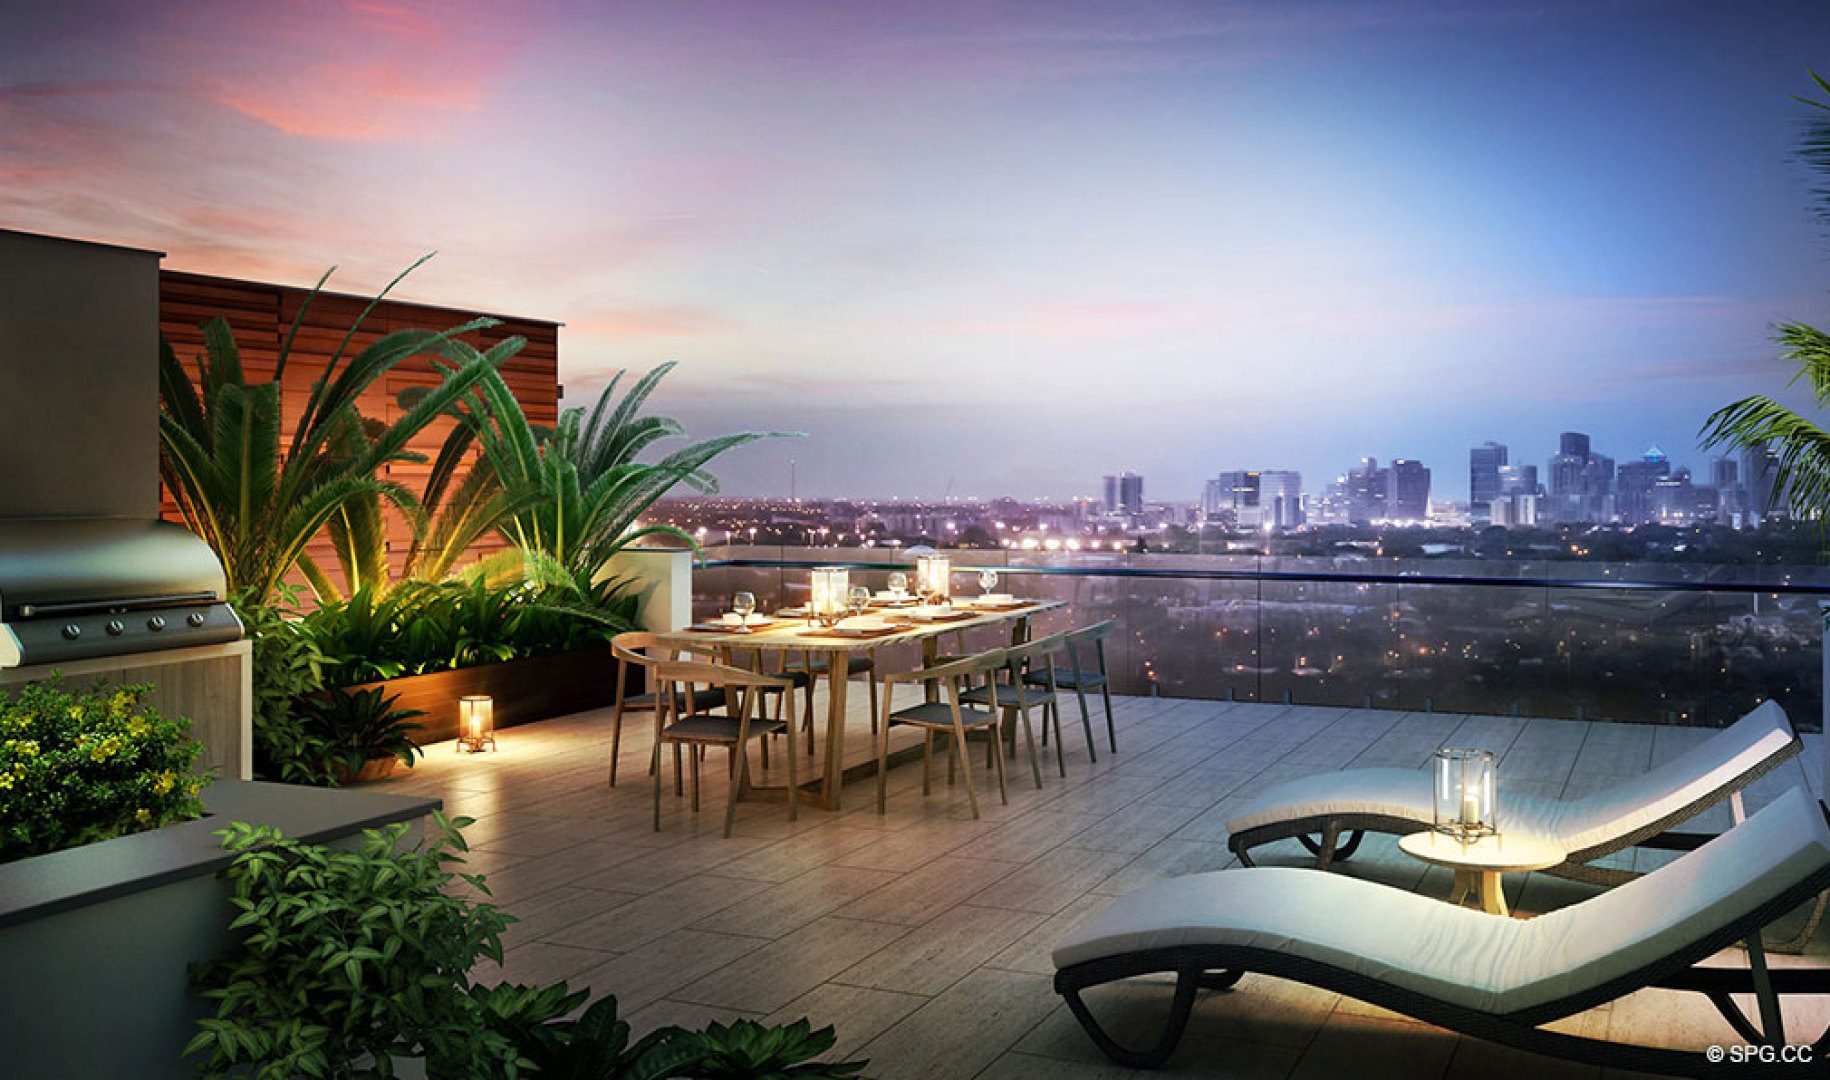 Outdoor Dining on the Rooftop Terrace at AquaMar Las Olas, Luxury Waterfront Condos in Fort Lauderdale, Florida 33301